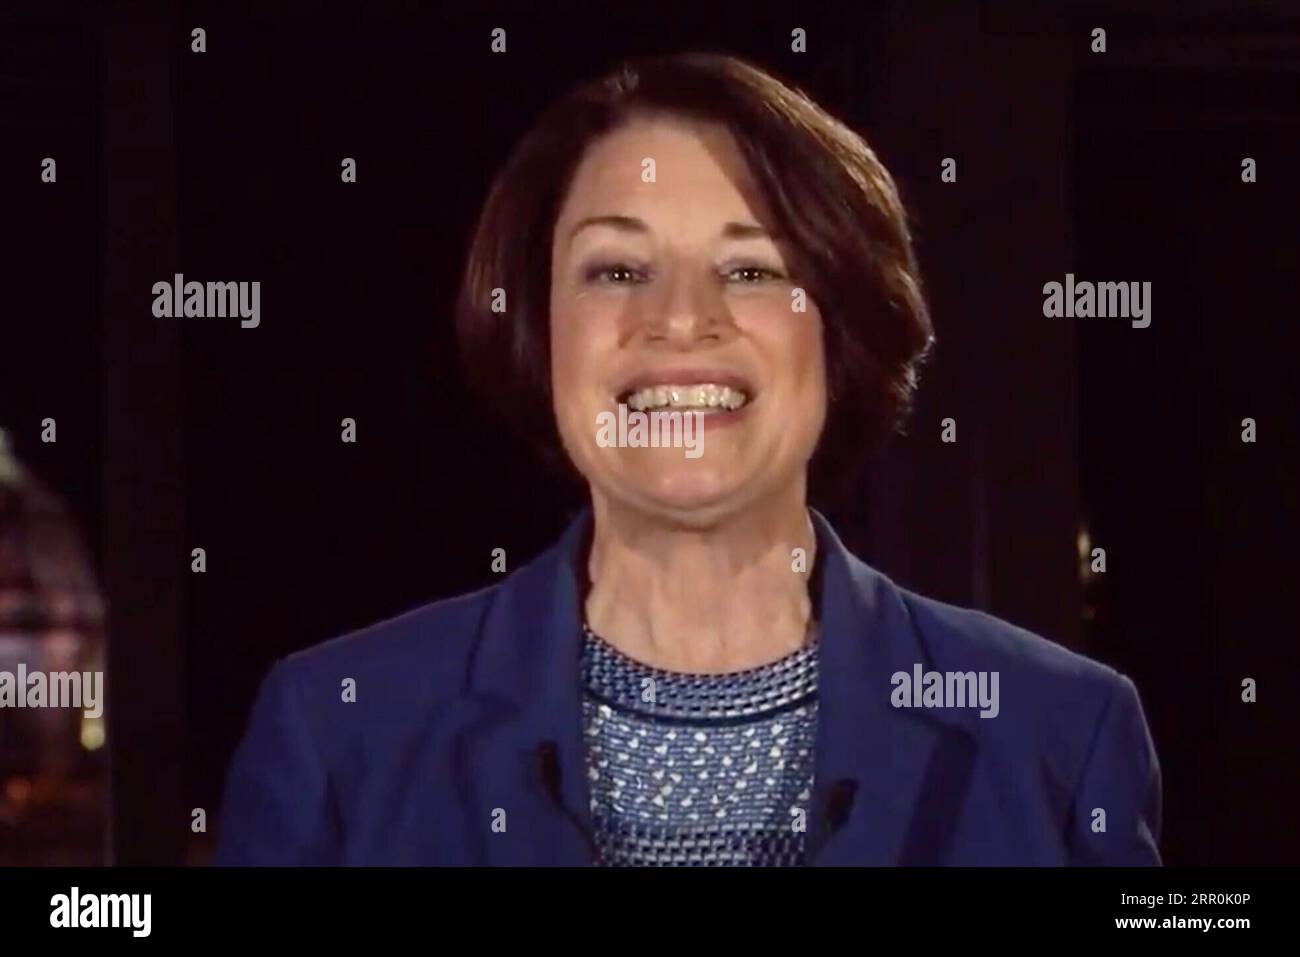 200818 -- WASHINGTON, D.C., Aug. 18, 2020 -- Former Democratic presidential candidate, U.S. Senator Amy Klobuchar speaks in a frame grab from a video feed of the , being held virtually amid the novel coronavirus pandemic, as participants from across the country are hosted over video with the control center in Milwaukee, Wisconsin, the United States, Aug. 17, 2020. The almost entirely virtual 2020 U.S. Democratic National Convention kicked off on Monday night. During the four-day event, presumptive Democratic presidential nominee Joe Biden will accept the nomination and California Senator Kamal Stock Photo